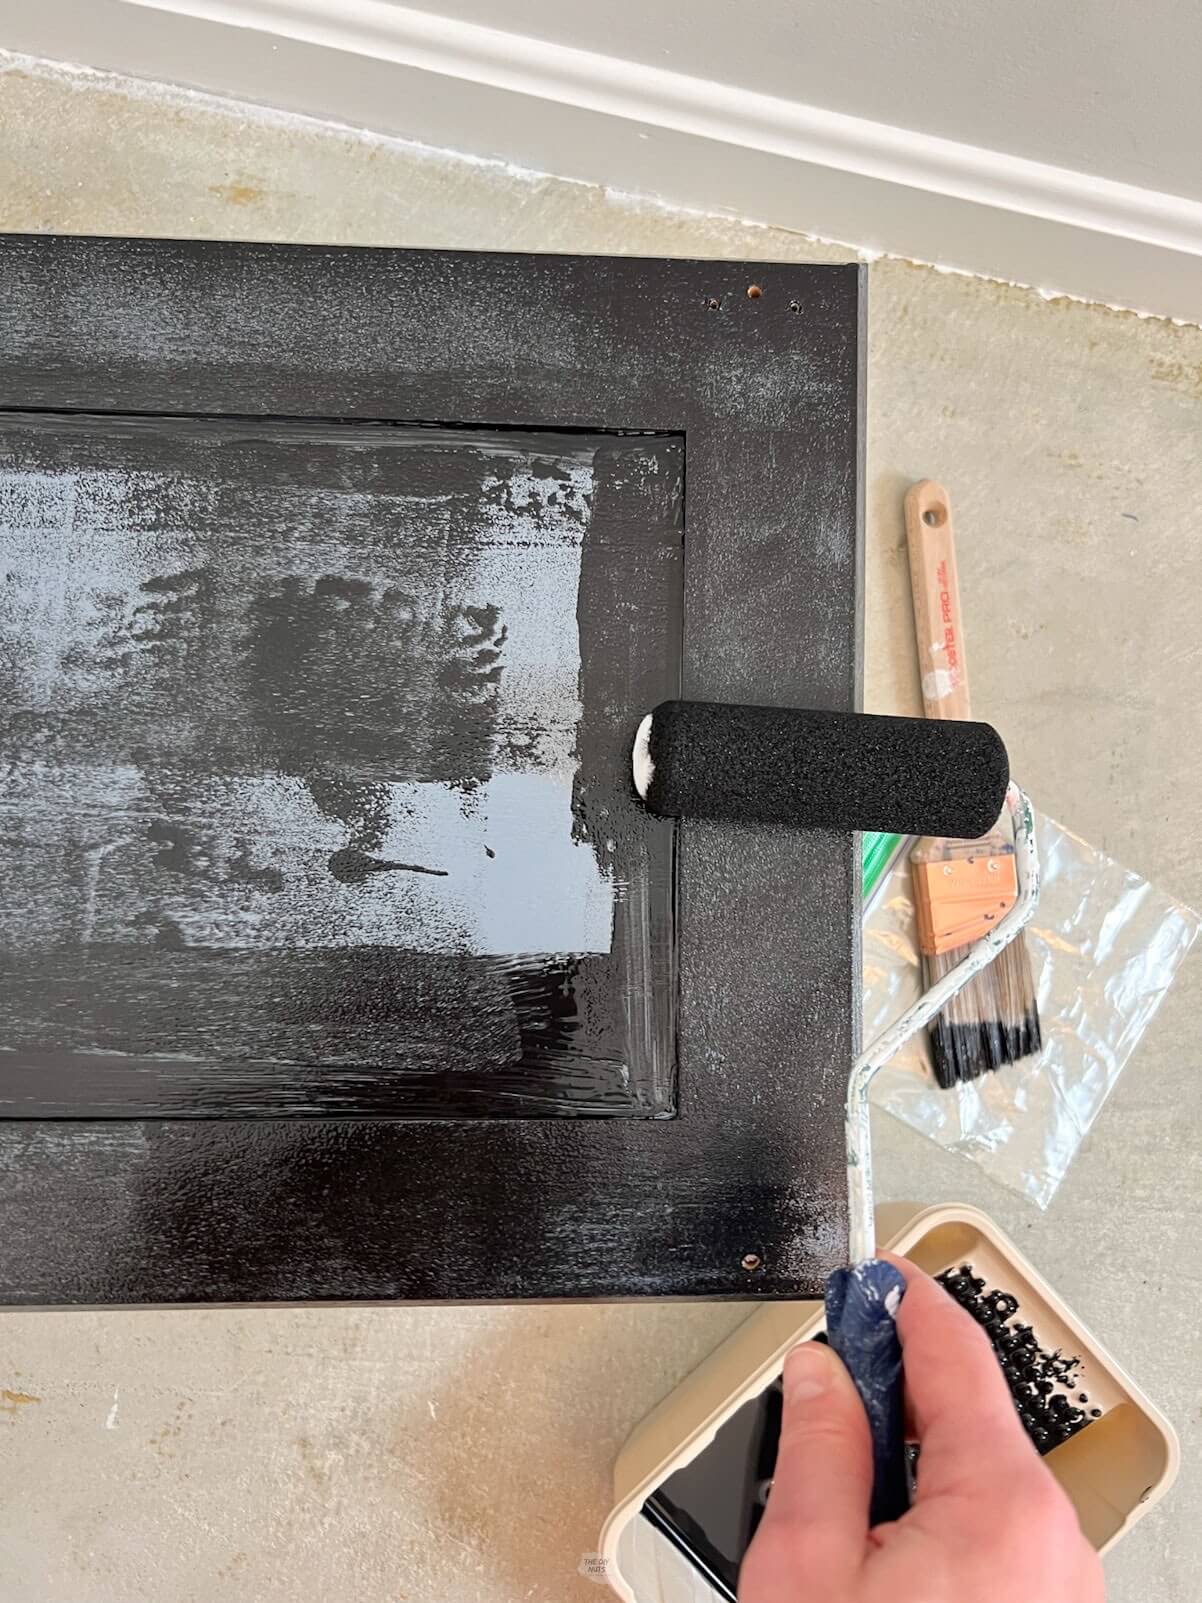 small foam roller painting the back of cabinet door with black paint.